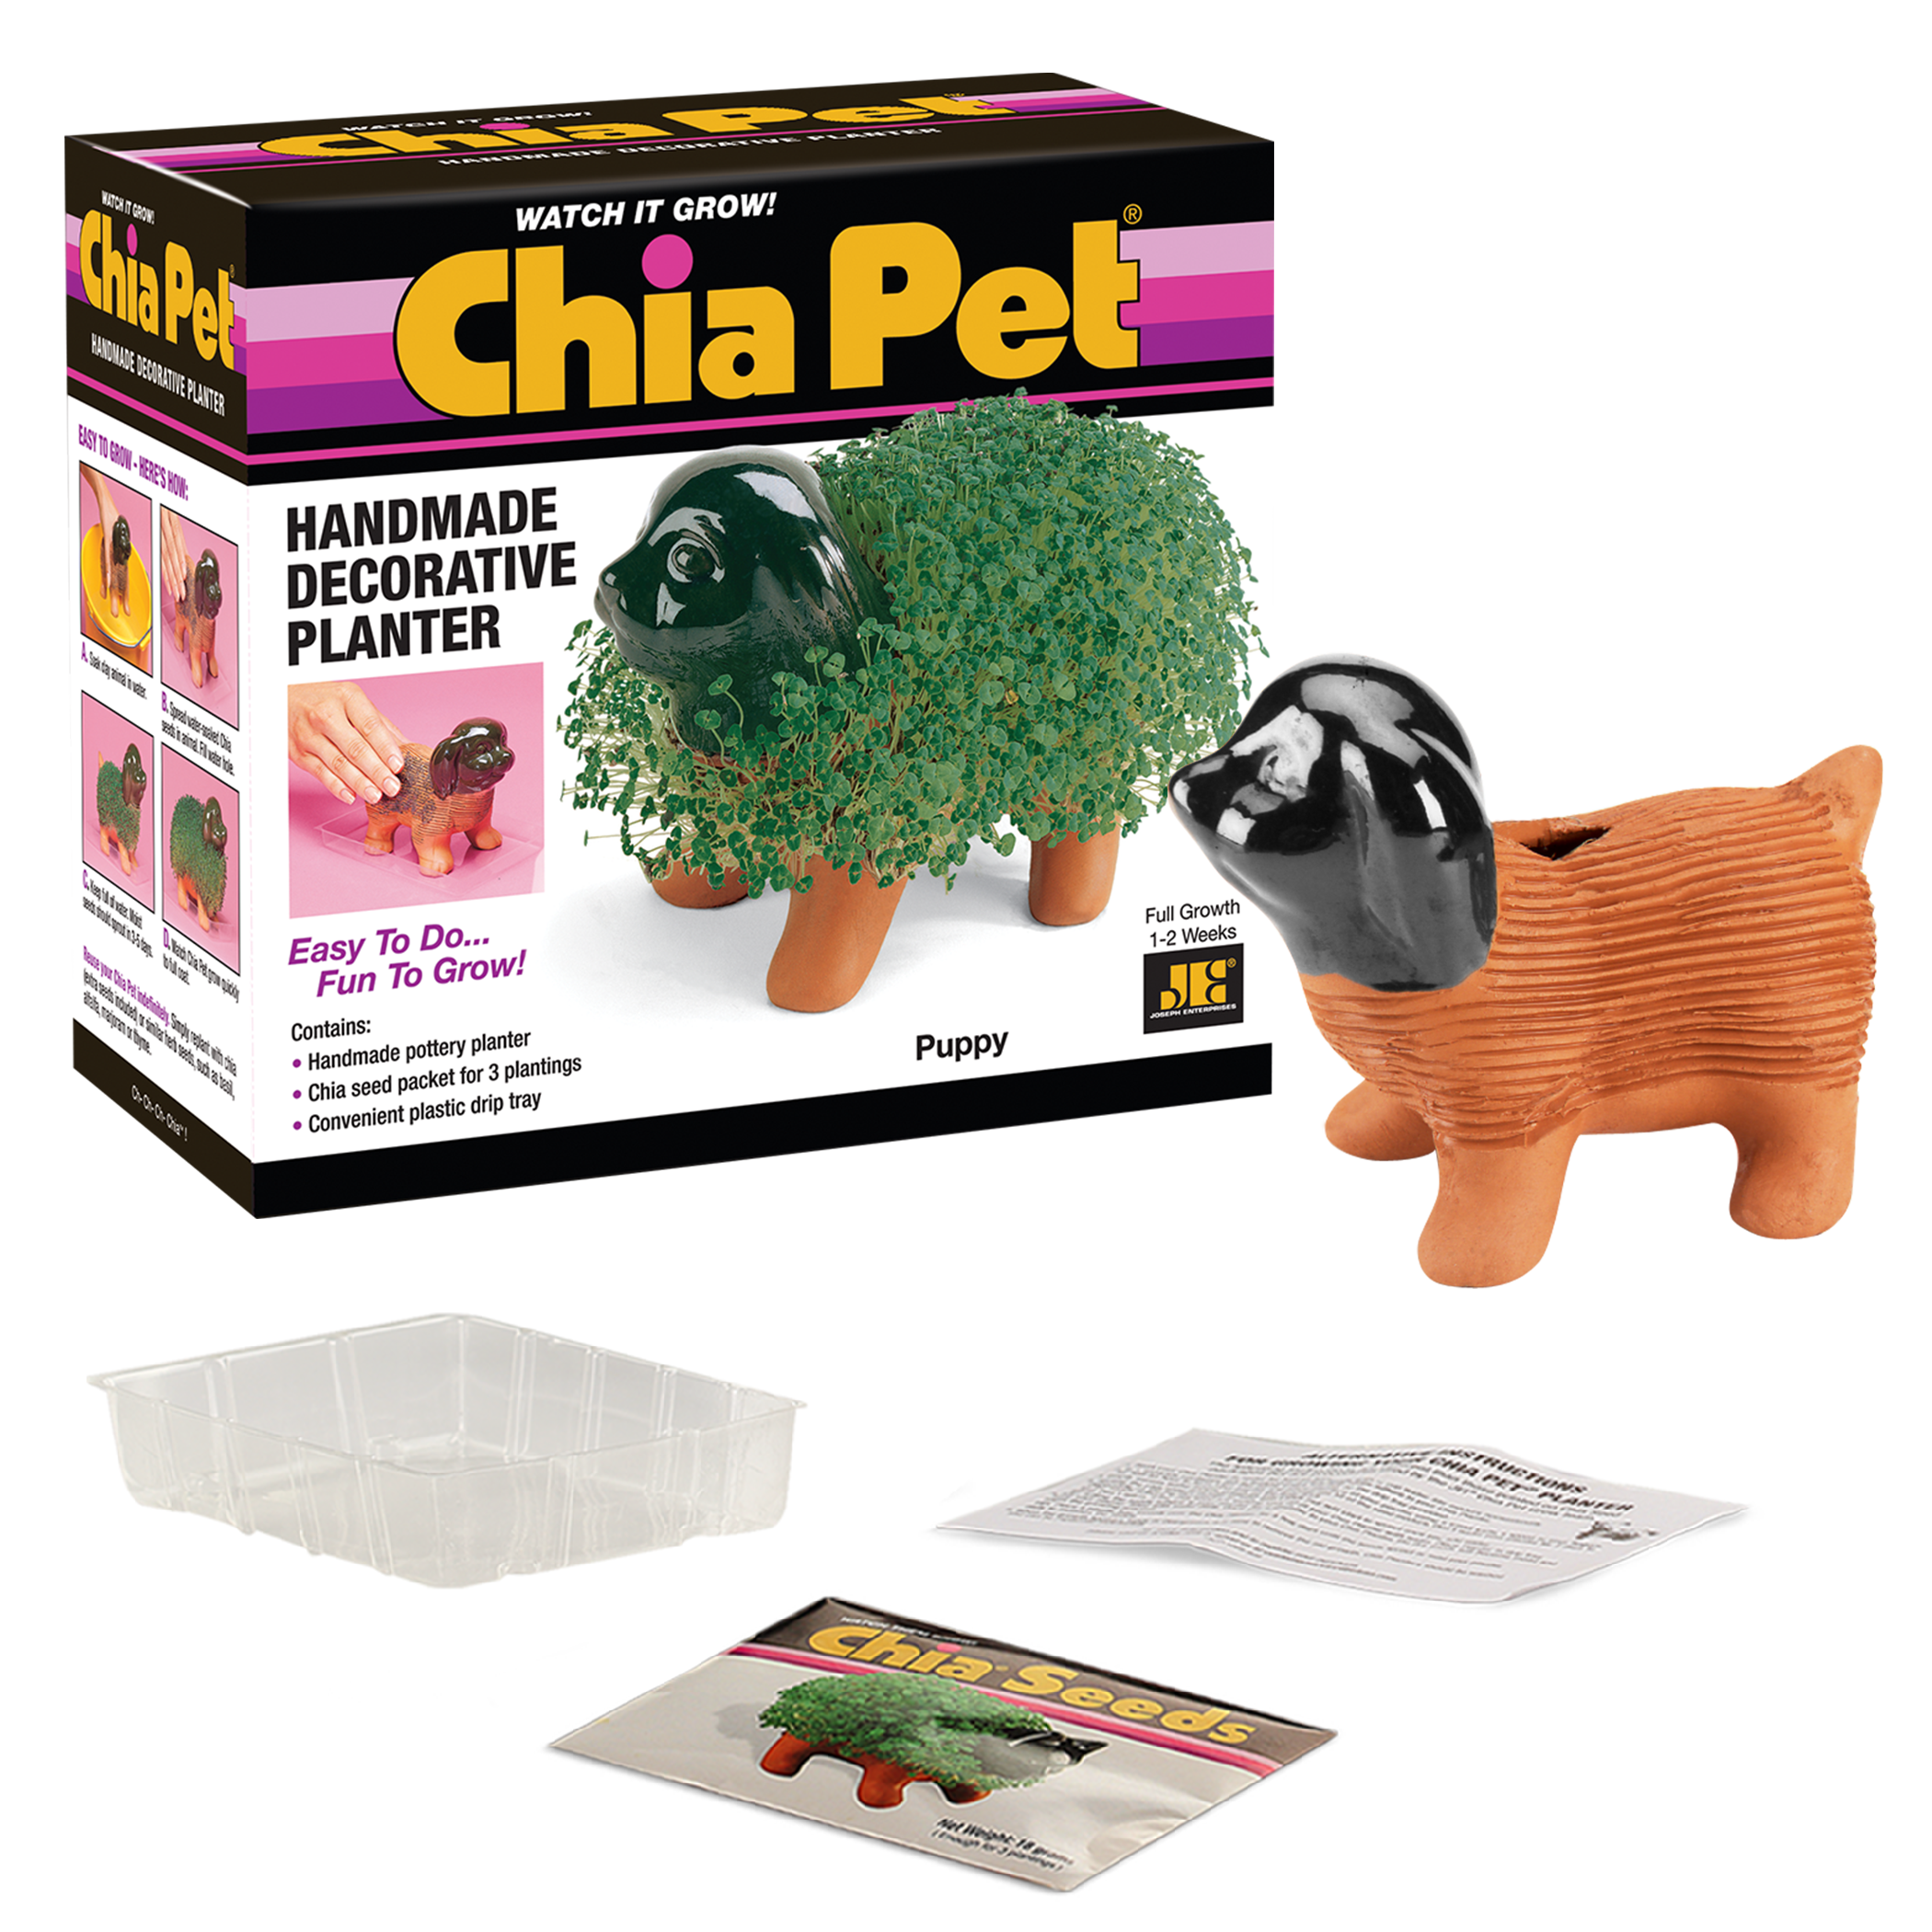 Original Puppy Chia Pet with all components: box, Chia Pet, drip tray, instructions, seed packet